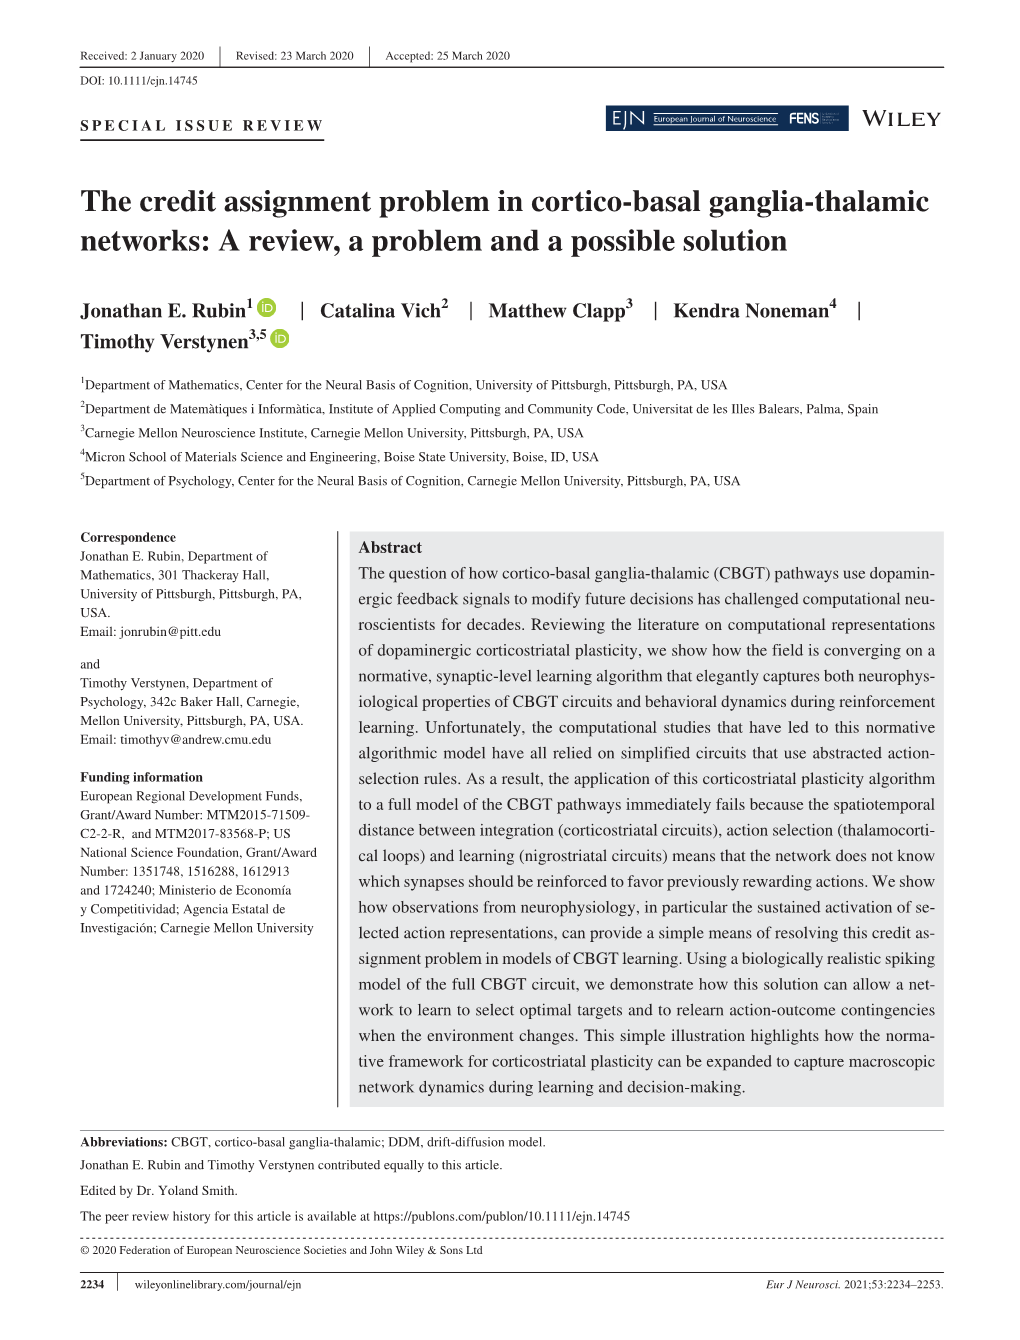 The Credit Assignment Problem in Cortico‐Basal Ganglia‐Thalamic